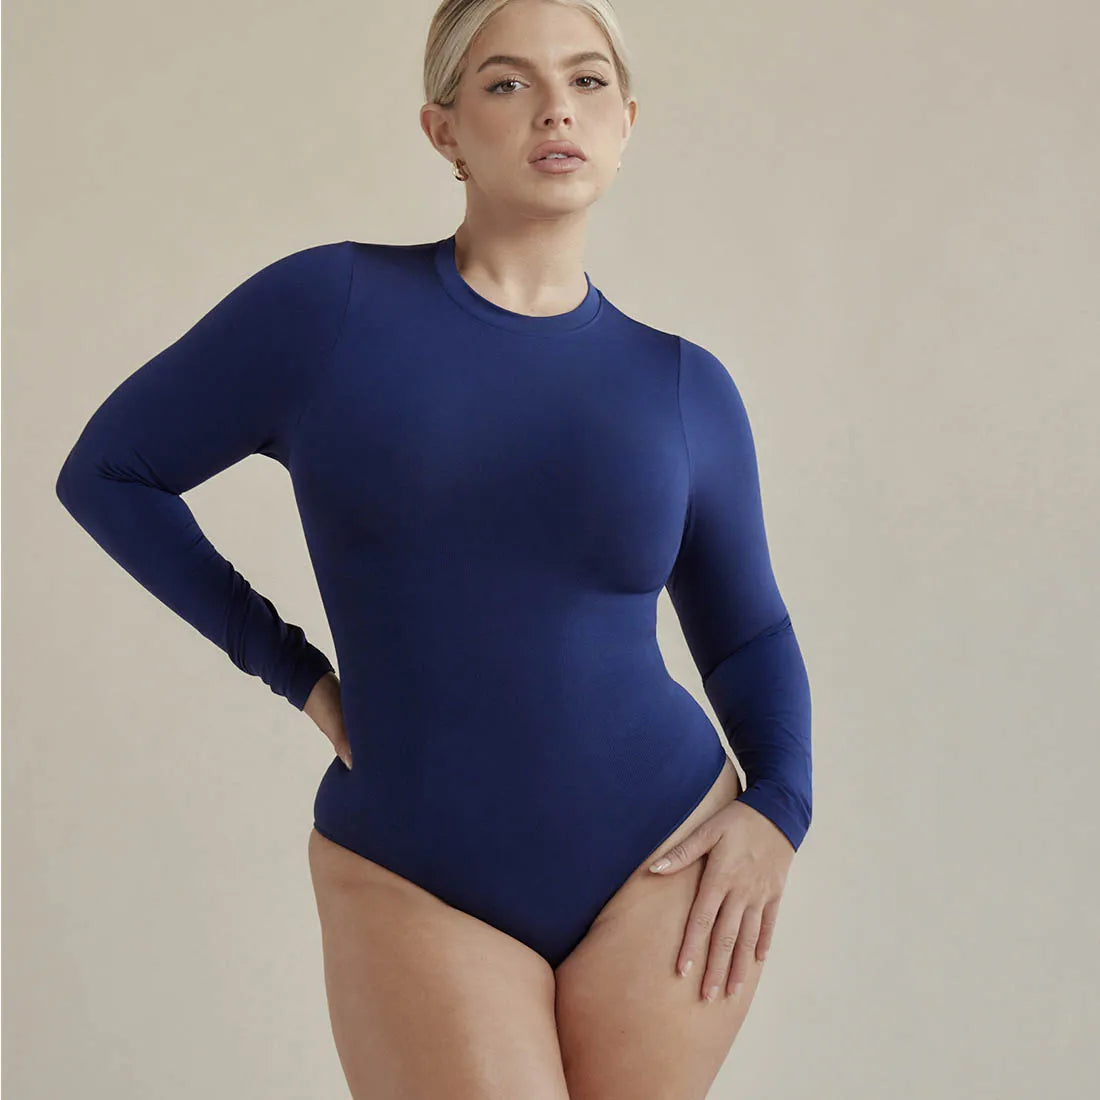 Buttery-Soft Women's Bodysuits from $20.79 Shipped for Prime